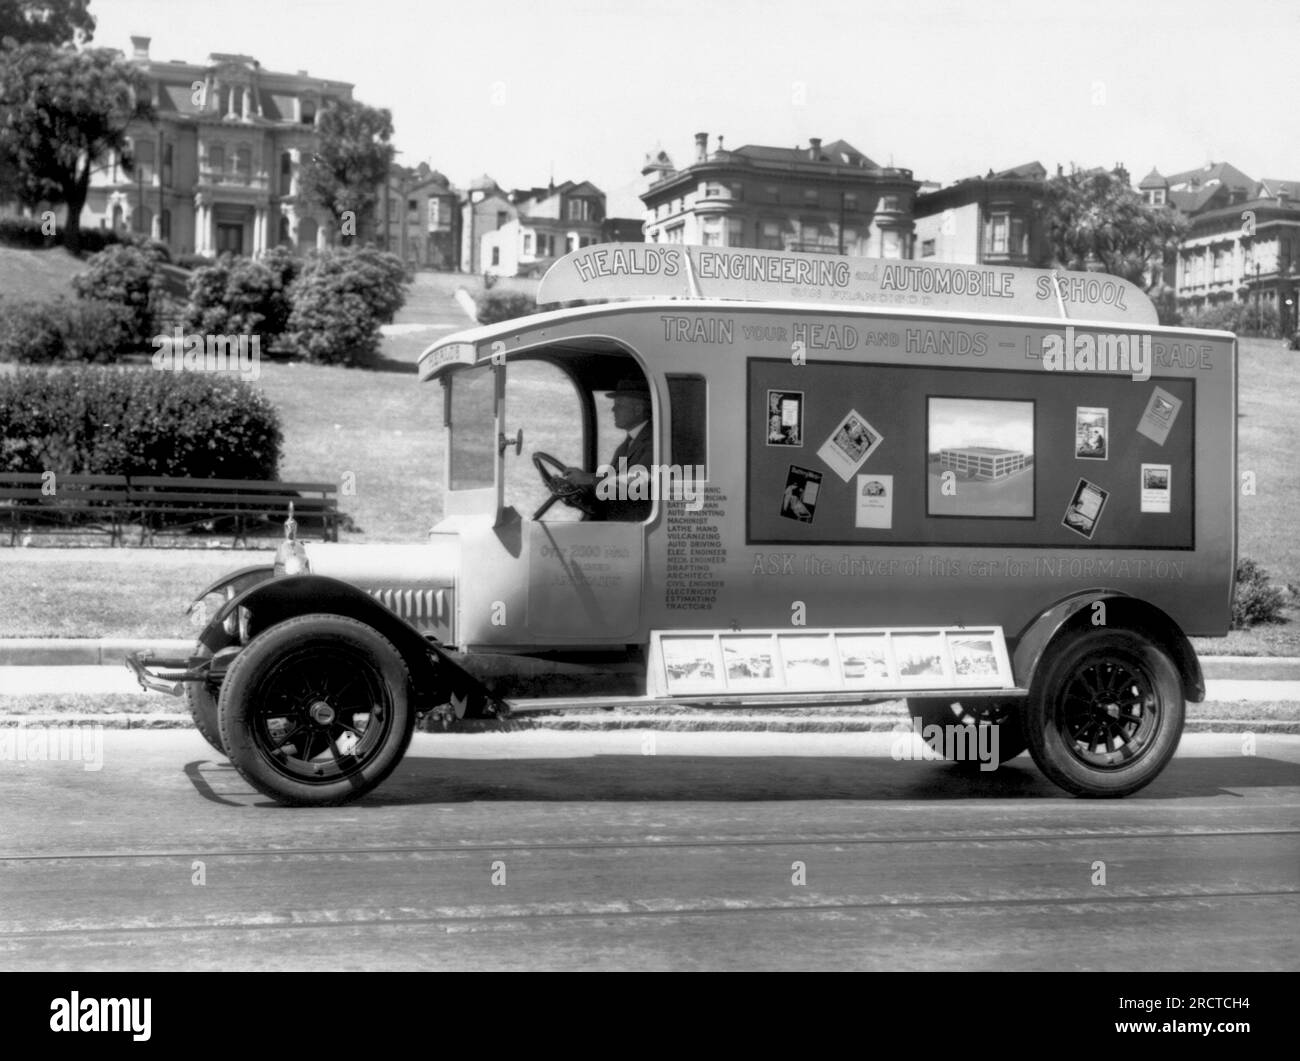 San Francisco, California:  c. 1922 A truck advertising Heald's Engineering and Automobile School. Stock Photo